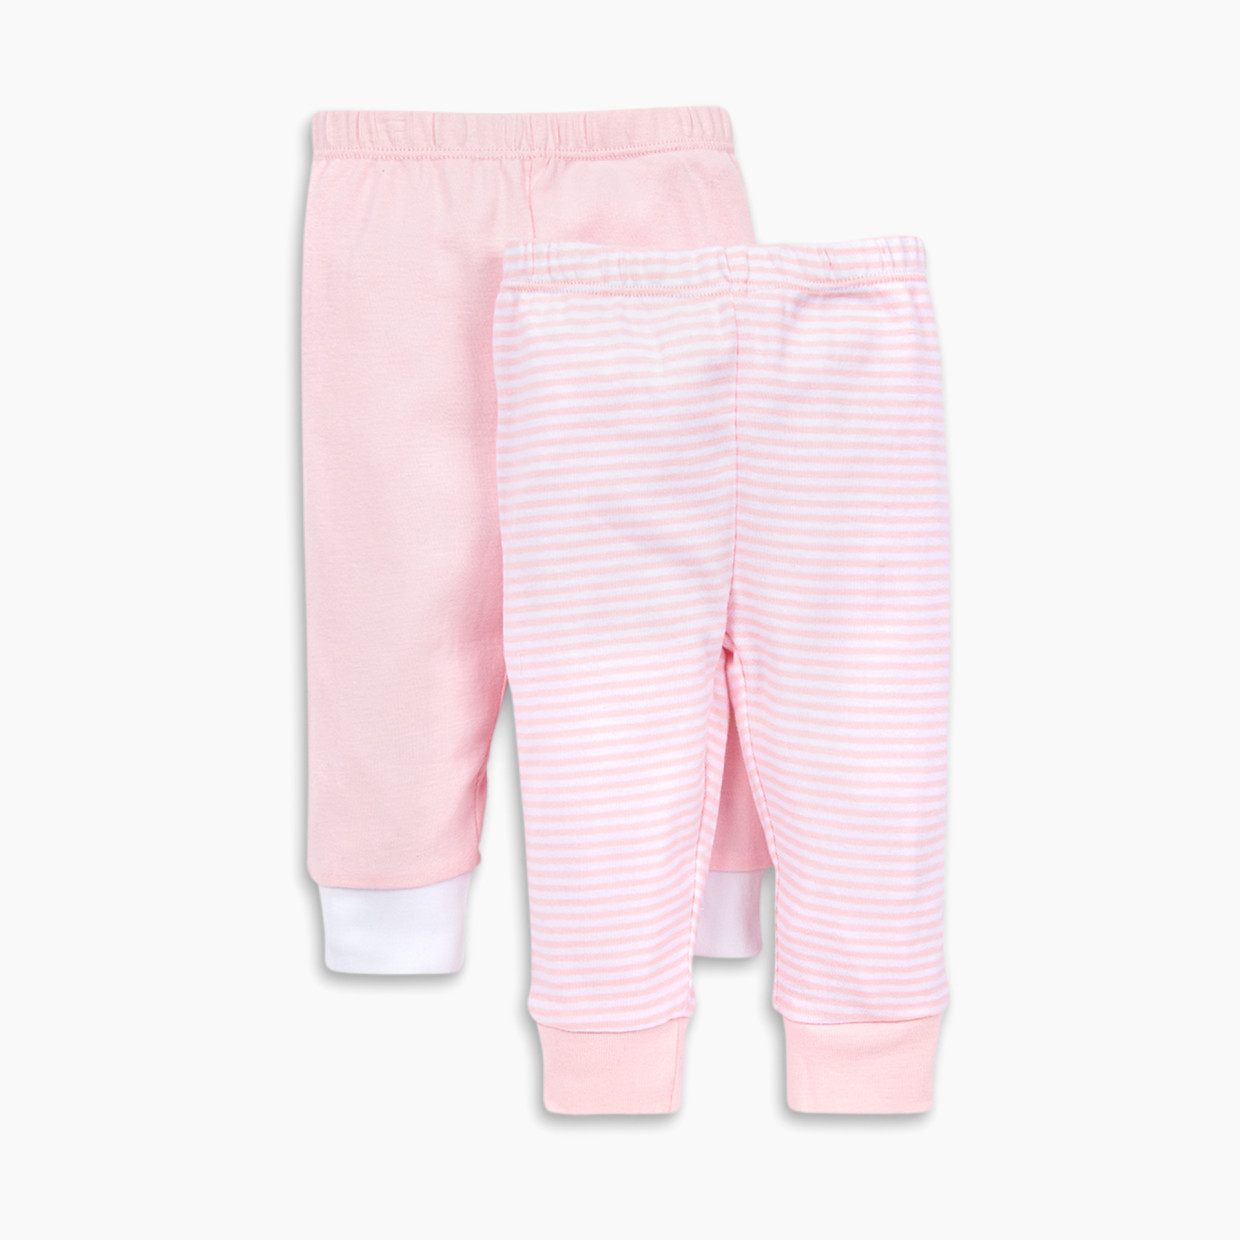 Burt's Bees Baby Organic Footless Pants (2 Pack) - Blossom, 0-3 Months.